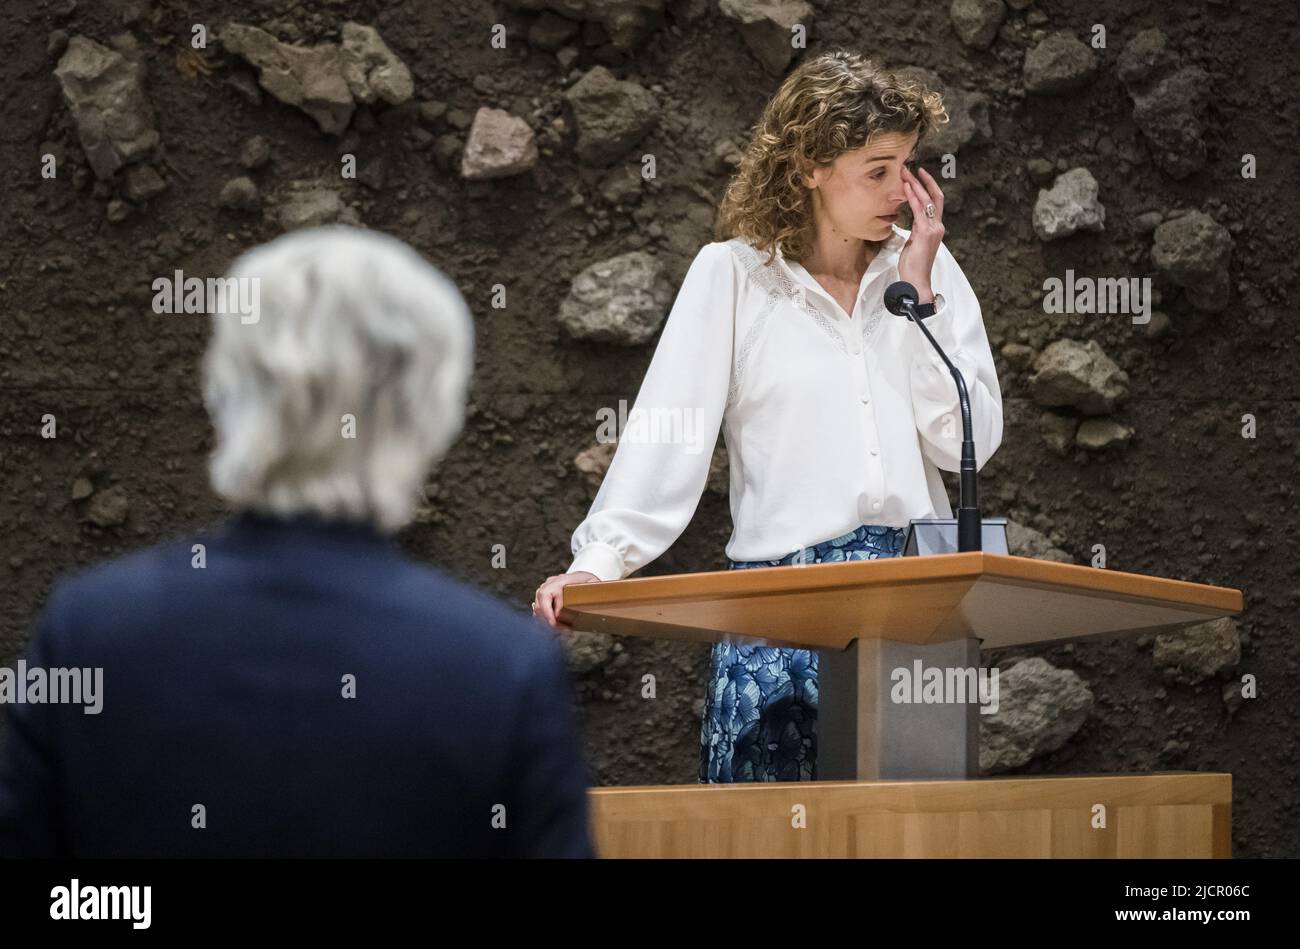 2022-06-15 12:12:28 THE HAGUE - Sophie Hermans (VVD) reacts emotionally  when Geert Wilders (PVV) calls her "Mark Rutte bag carriers" during the  debate with the House of Representatives about the budget plans